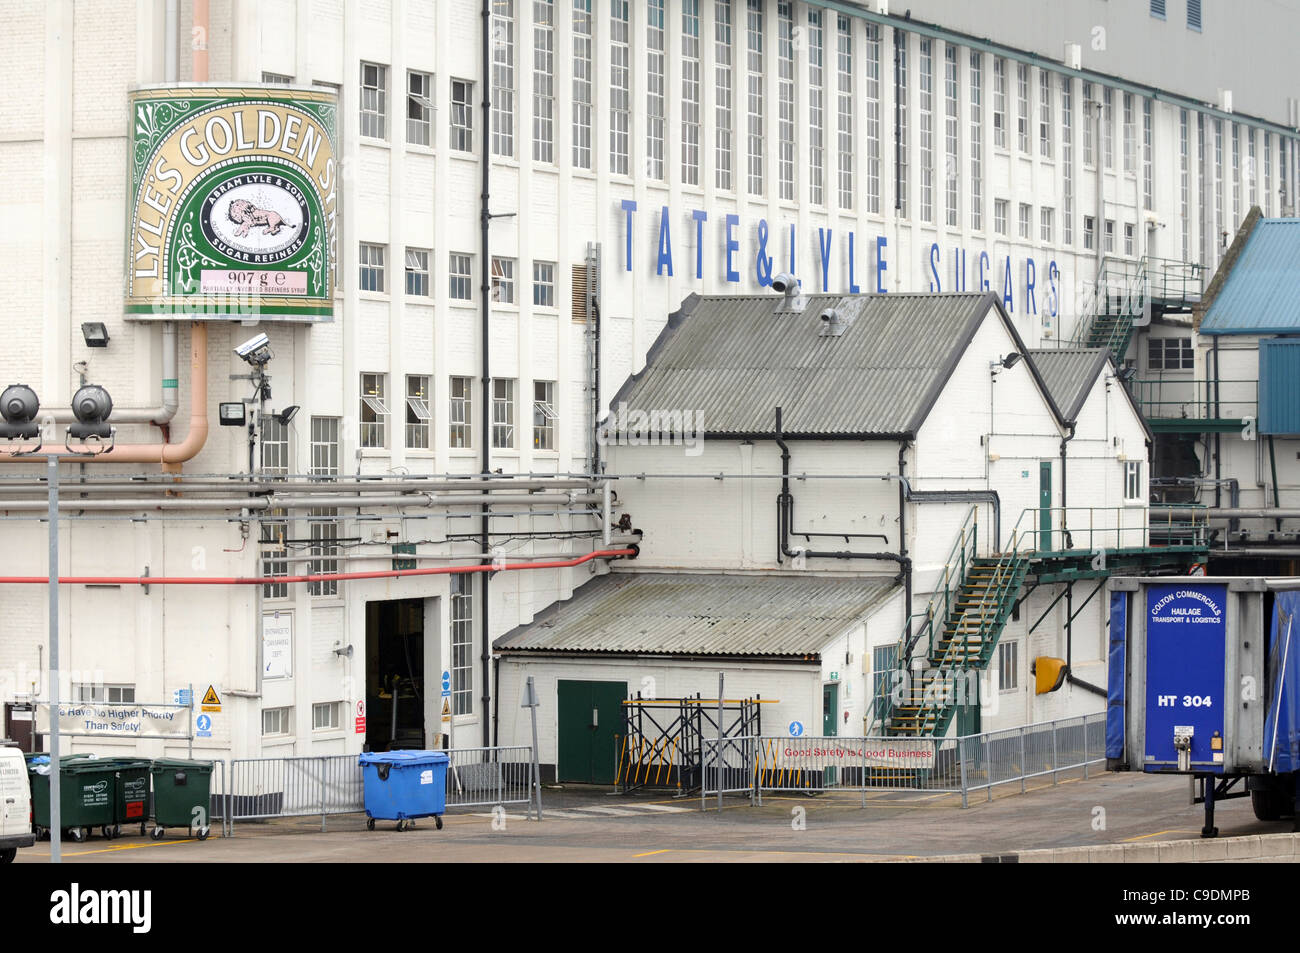 Tate and Lyle sugar factory situated at West Silvertown in east London, Britain, UK Stock Photo